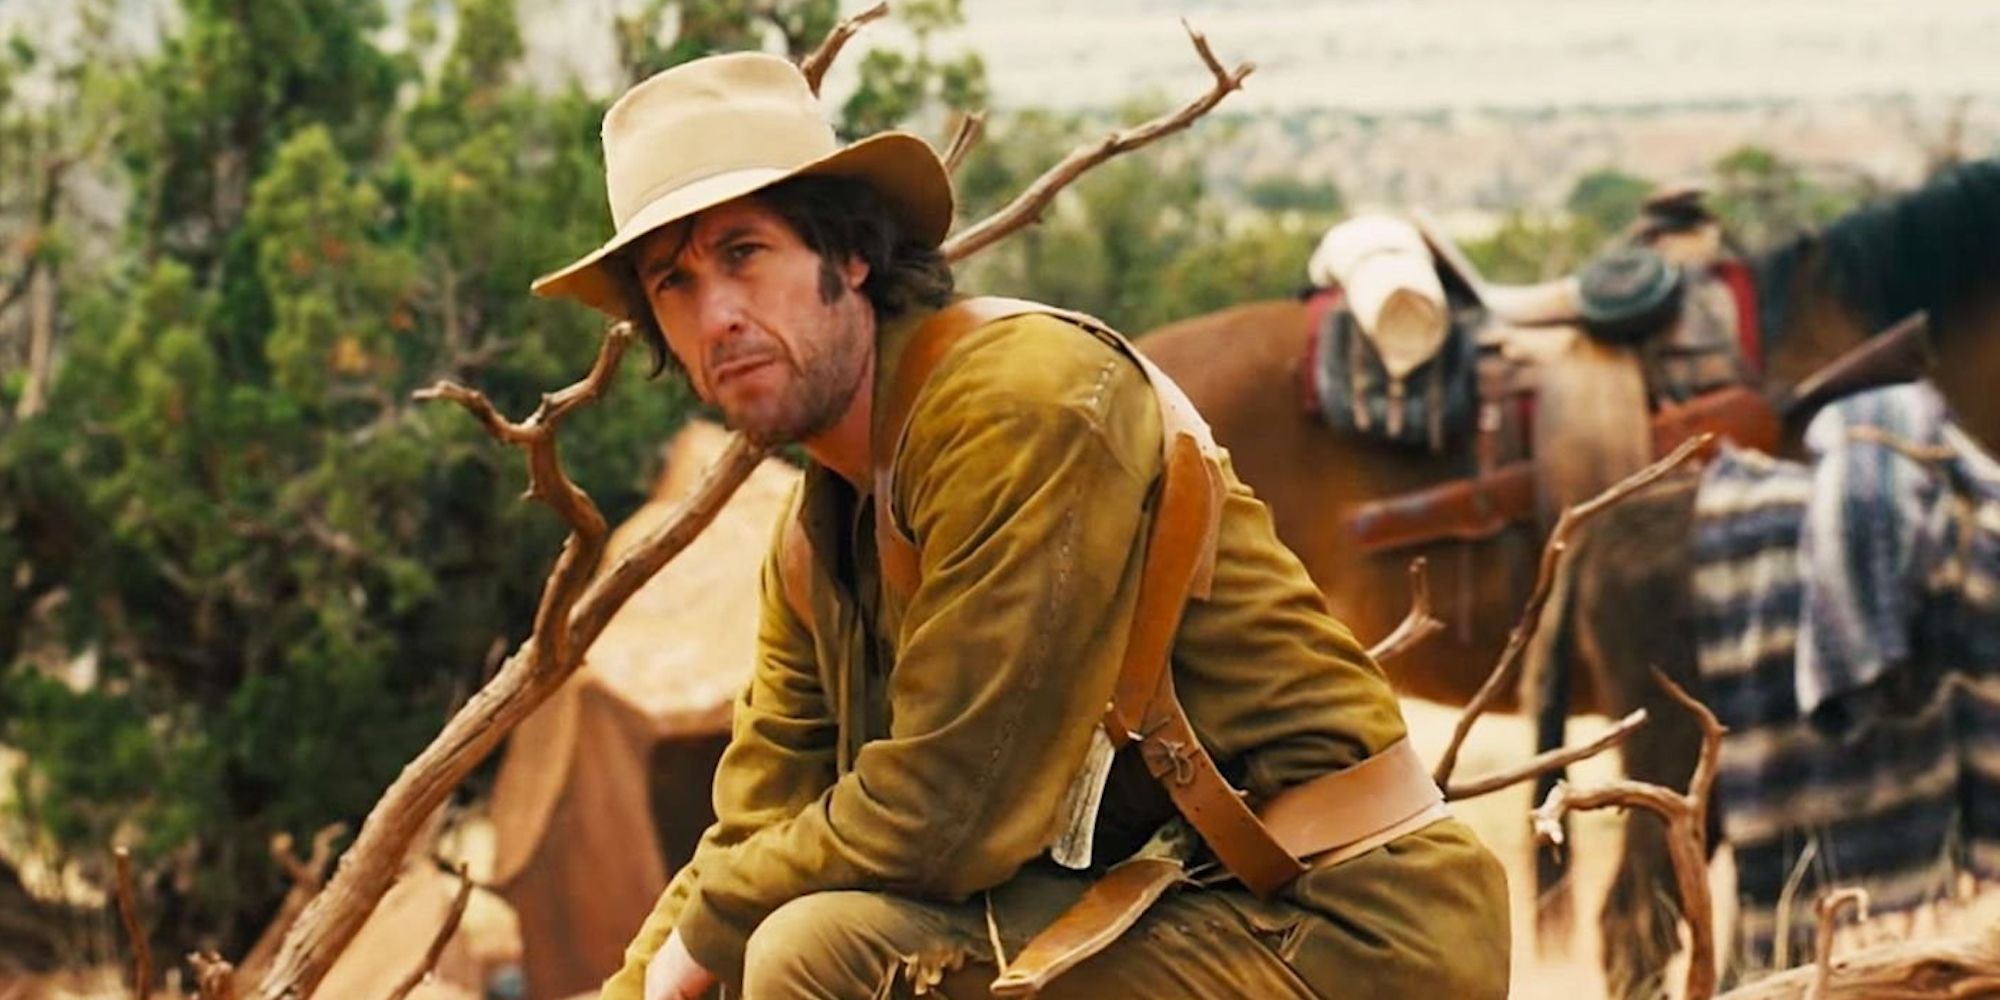 Tommy, sitting by a horse and looking serious in The Ridiculous 6